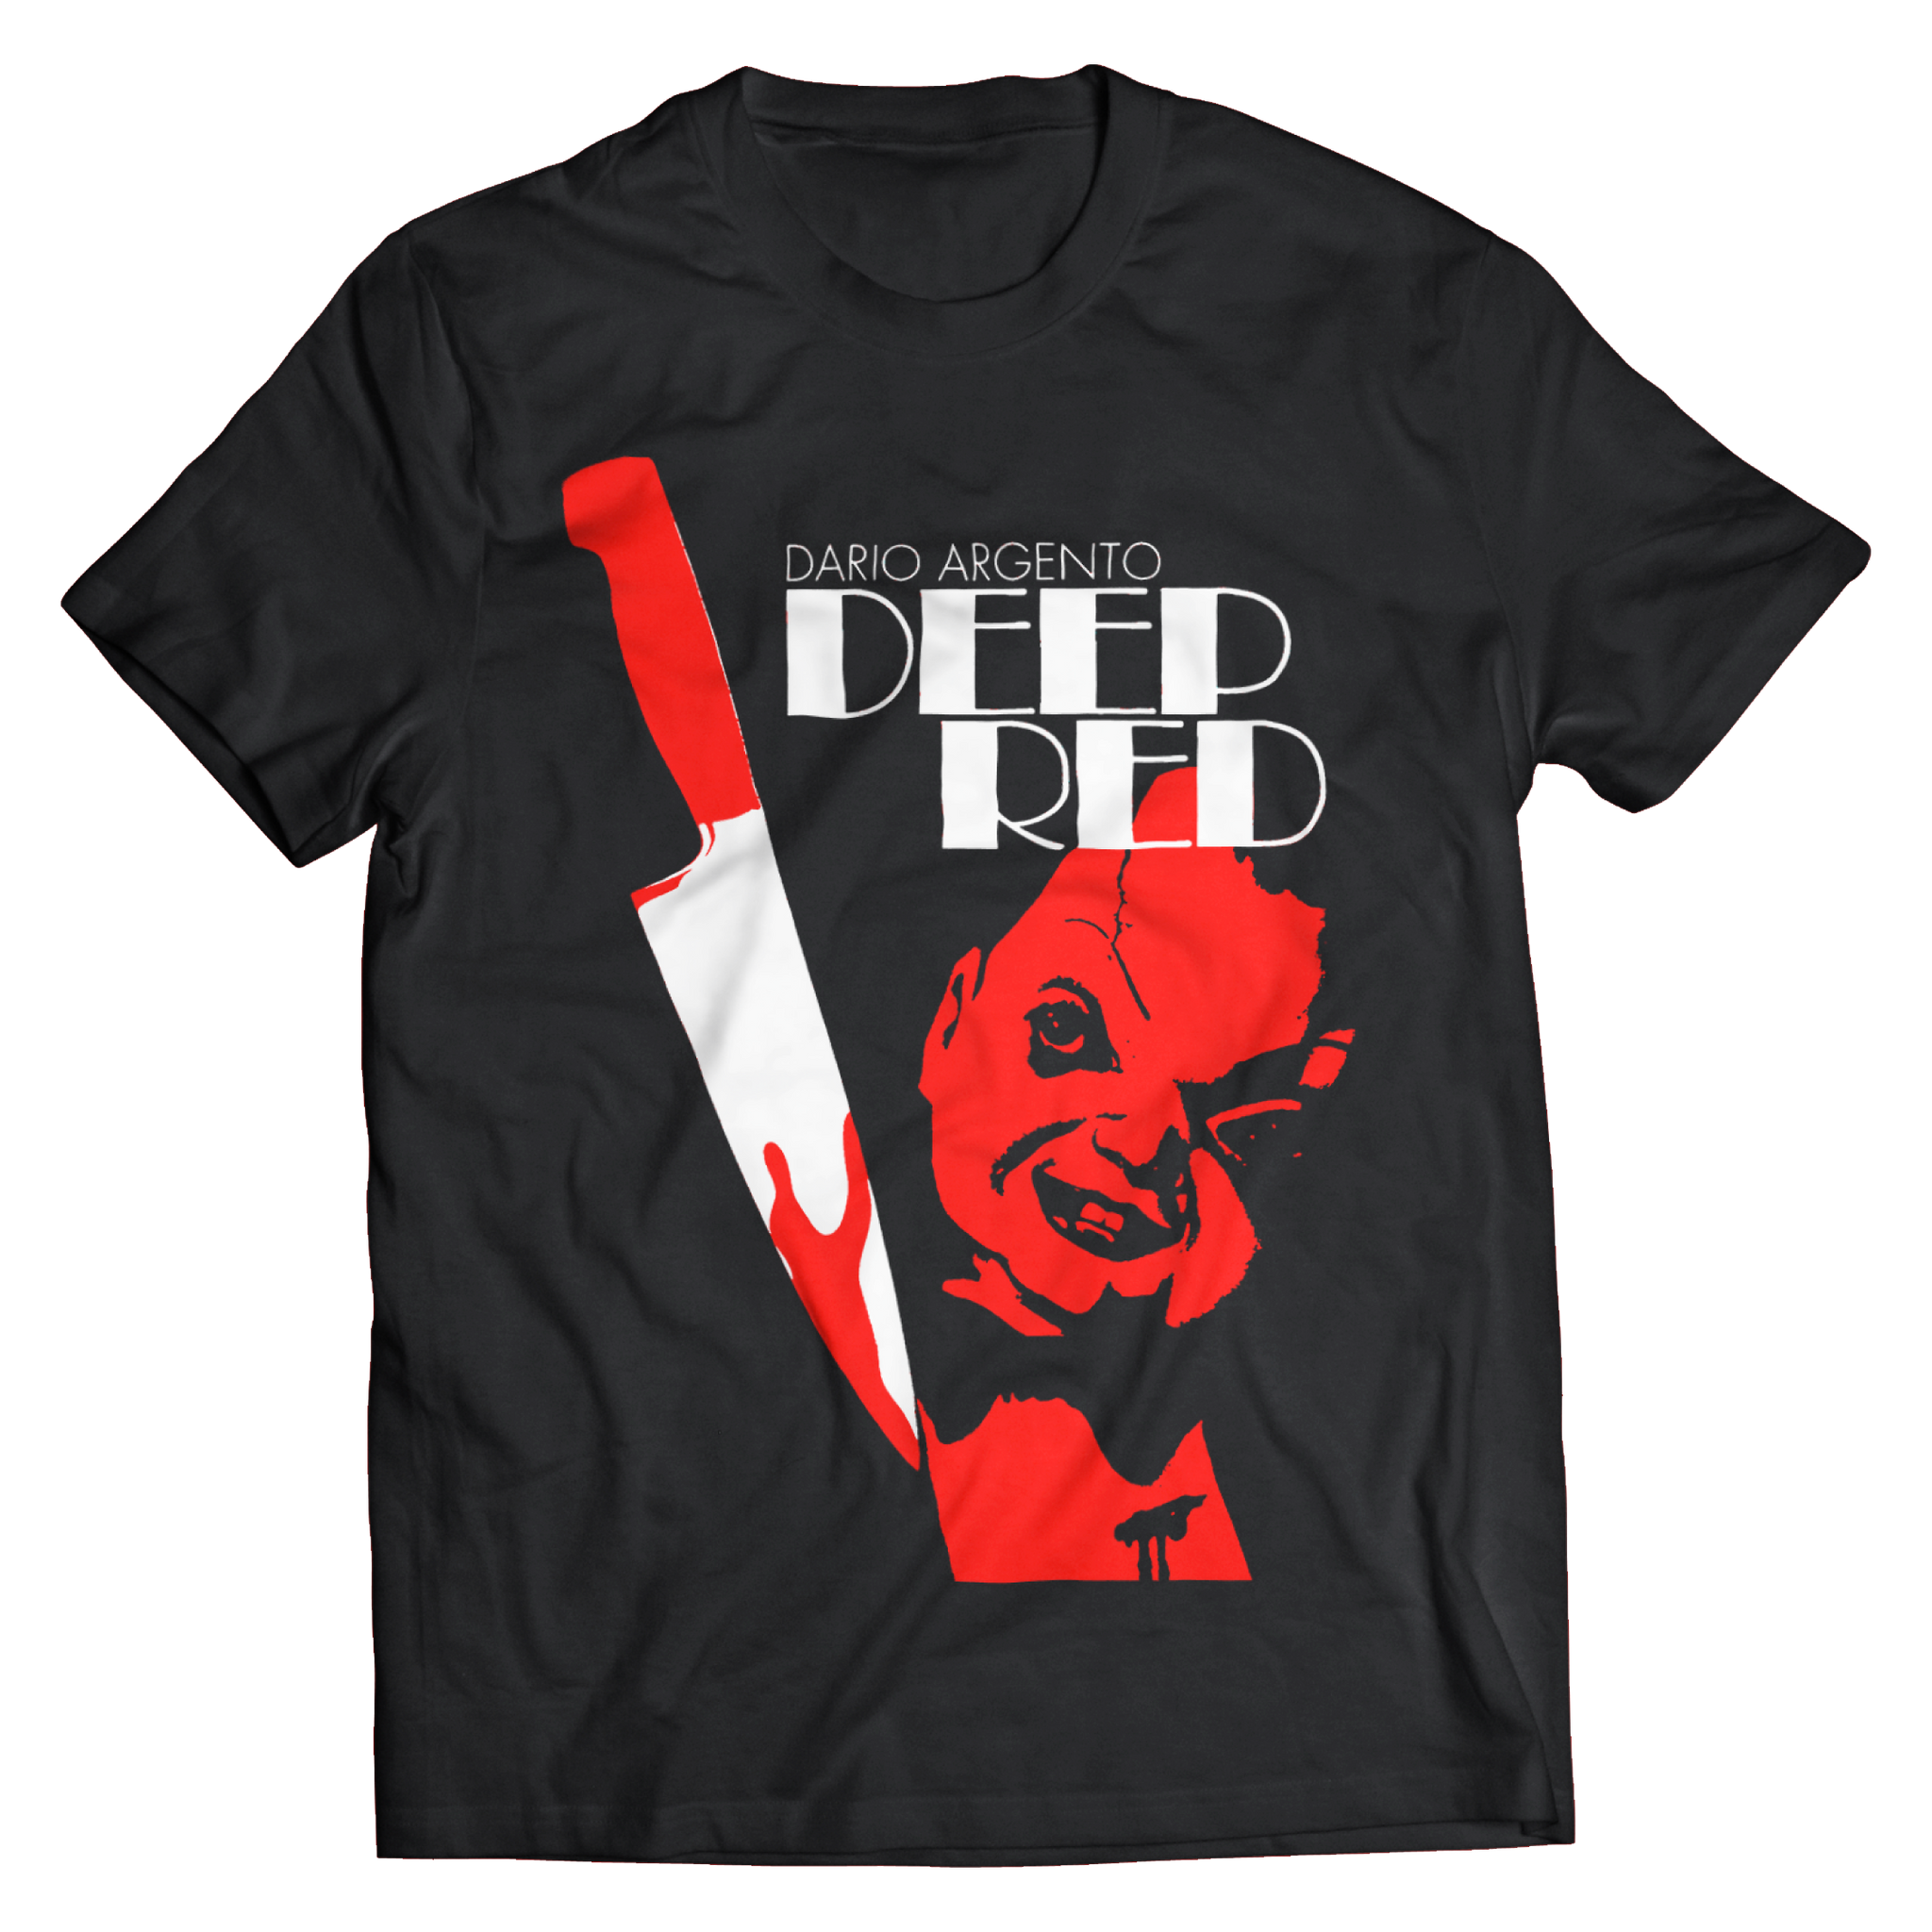 DARIO ARGENTO: "DEEP RED" MAD PUPPET T-SHIRT